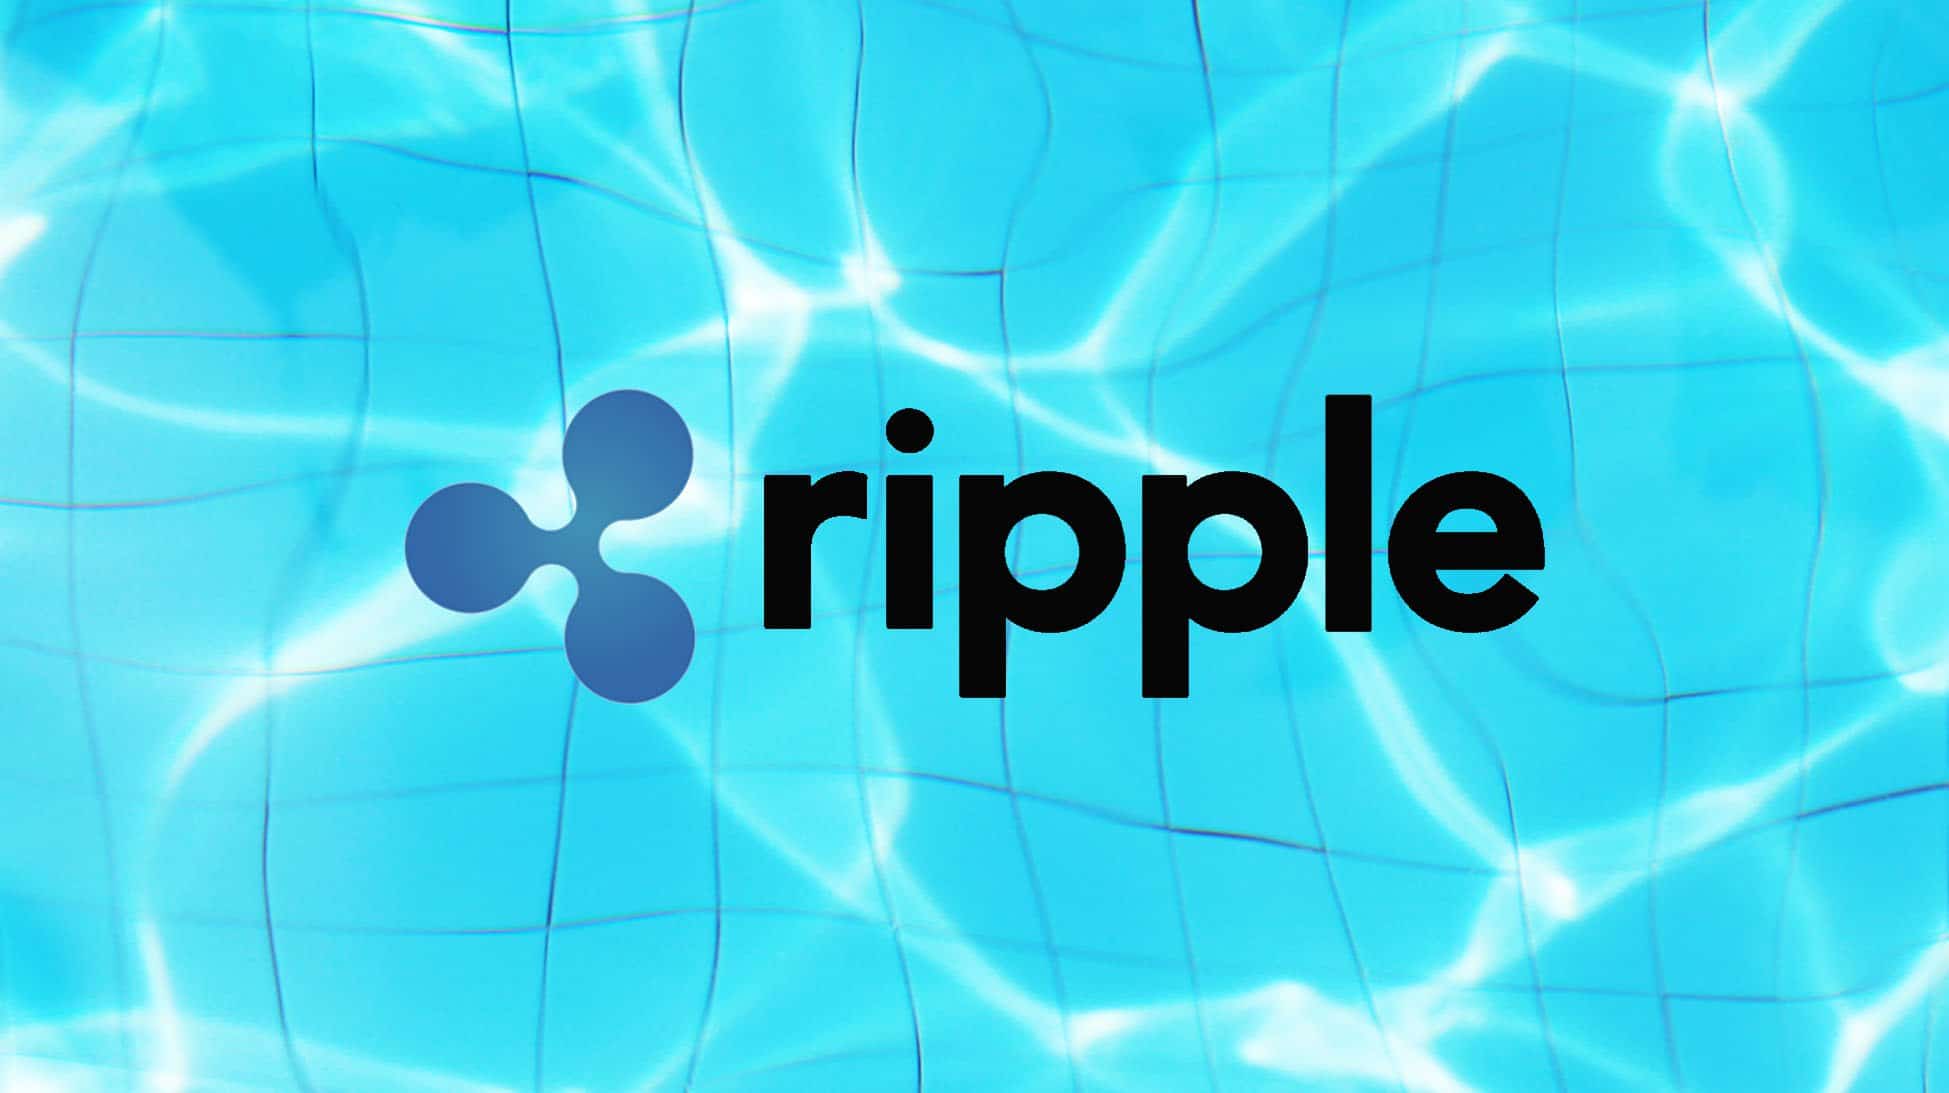 Price Ripple (XRP) in 2019 worst performing of all major cryptos